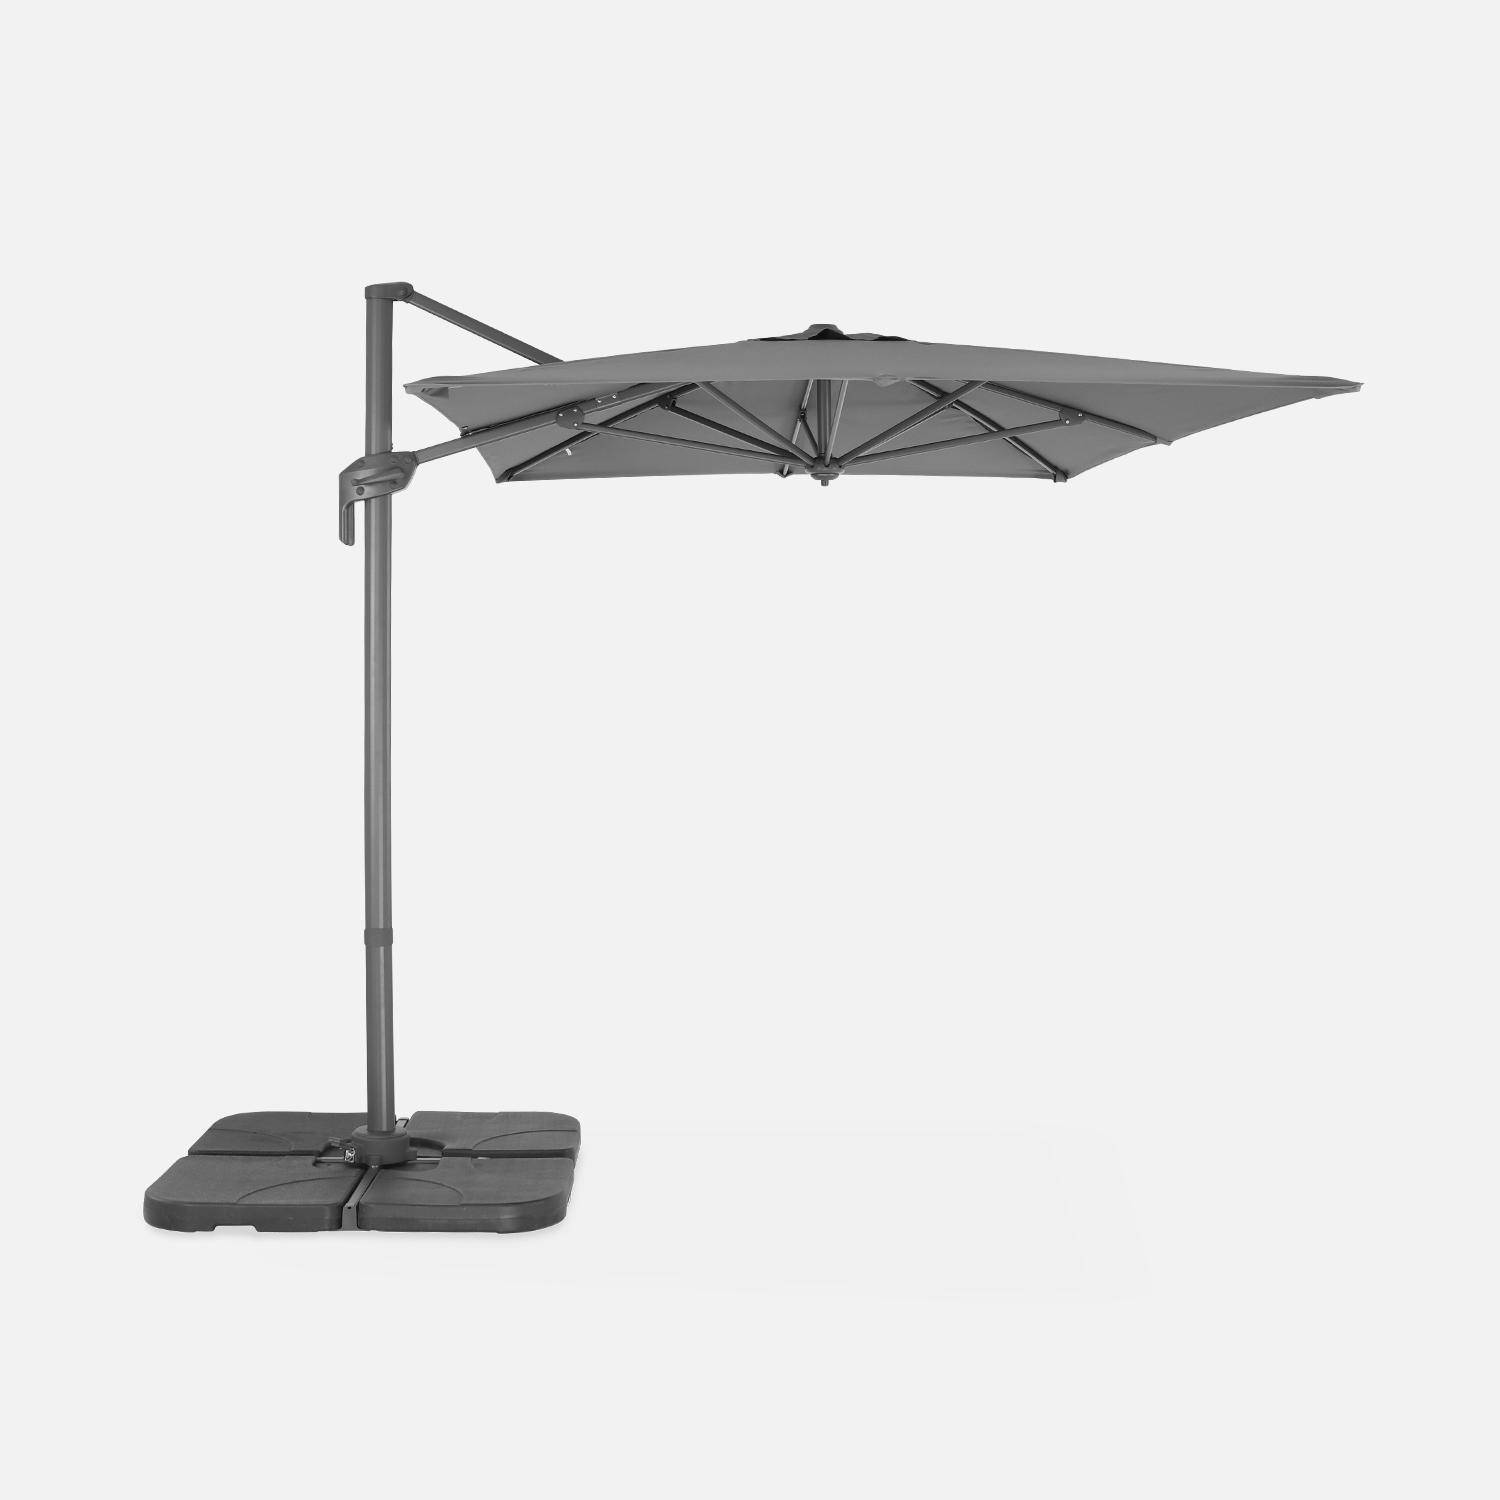 2x3m rectangular cantilever paraso - parasol can be tilted, folded and rotated 360 degreesl - Antibes - Grey,sweeek,Photo4